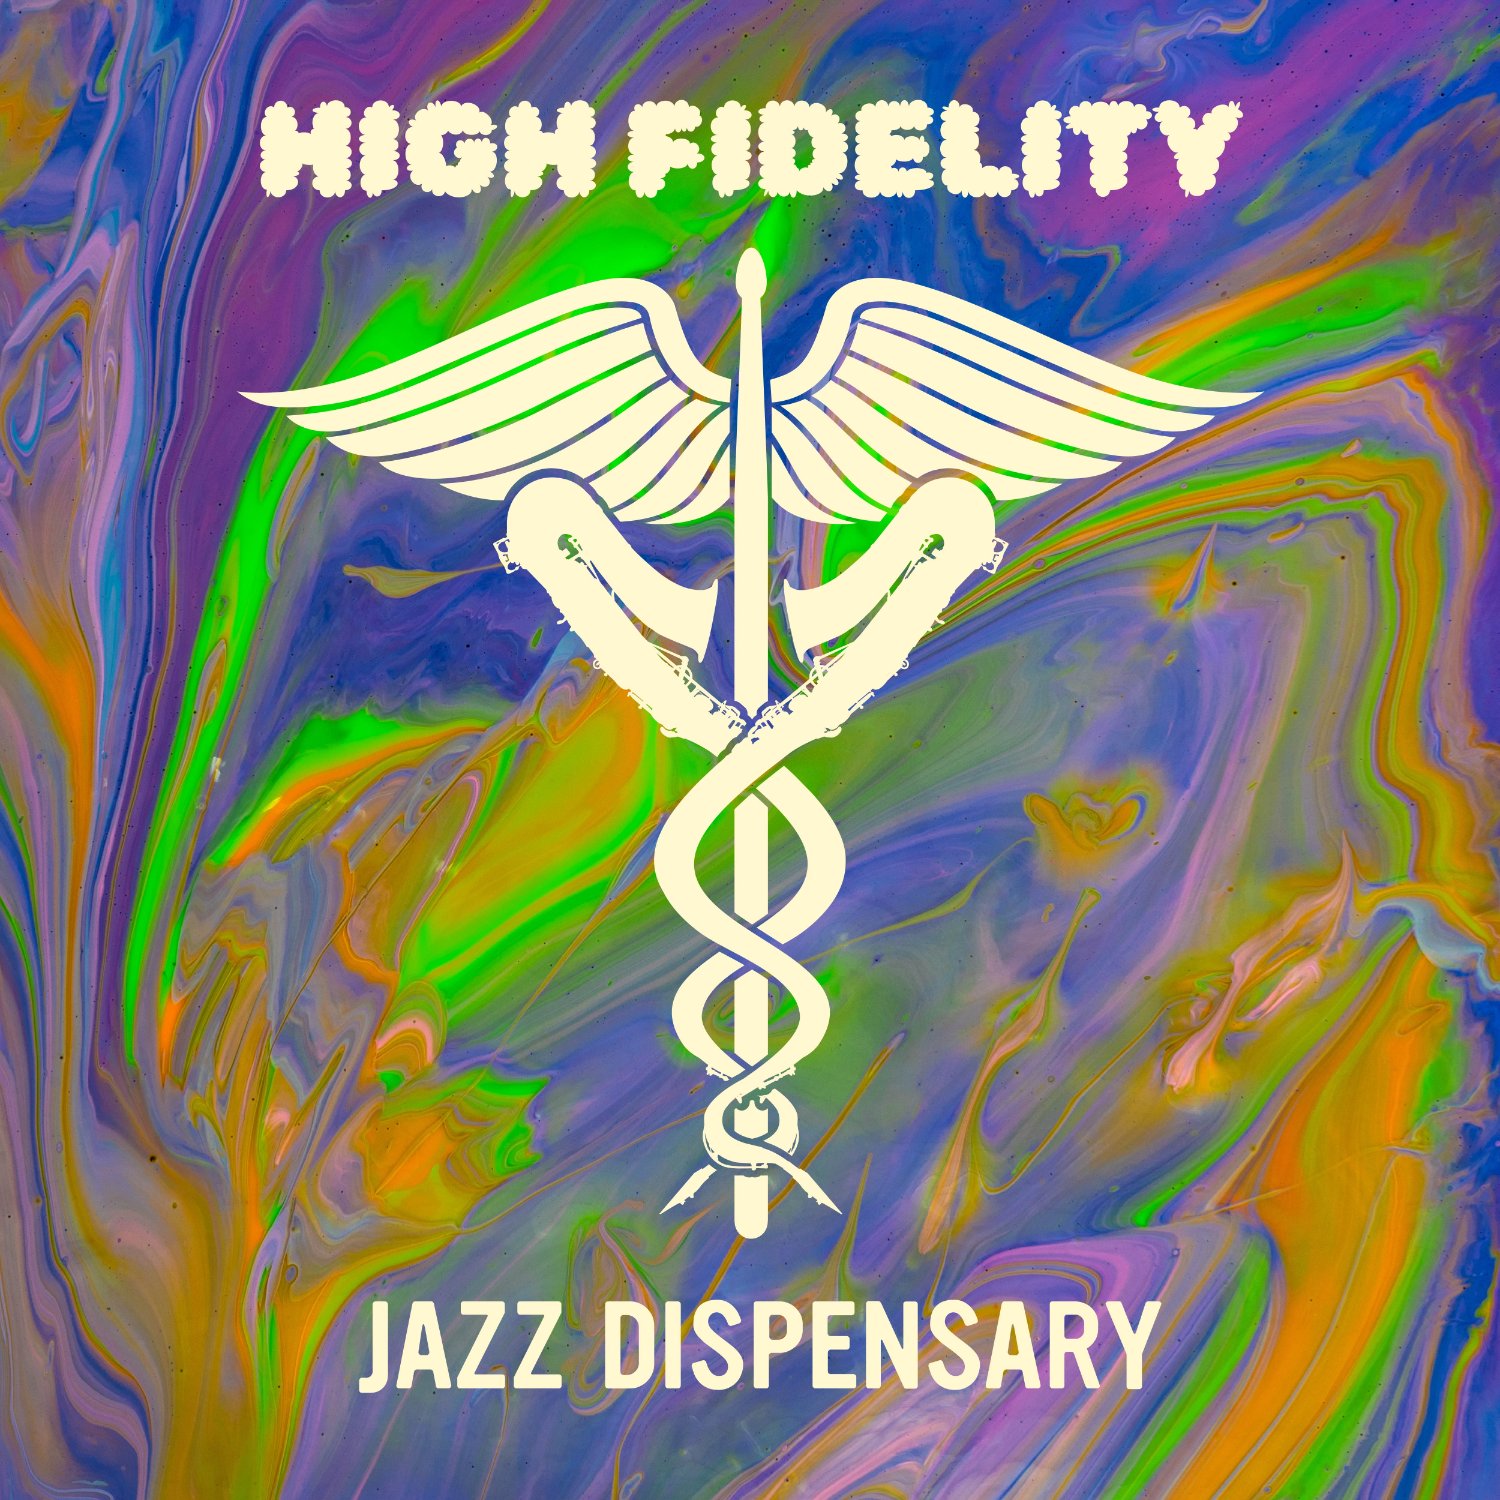 Featured Image for “High Fidelity”